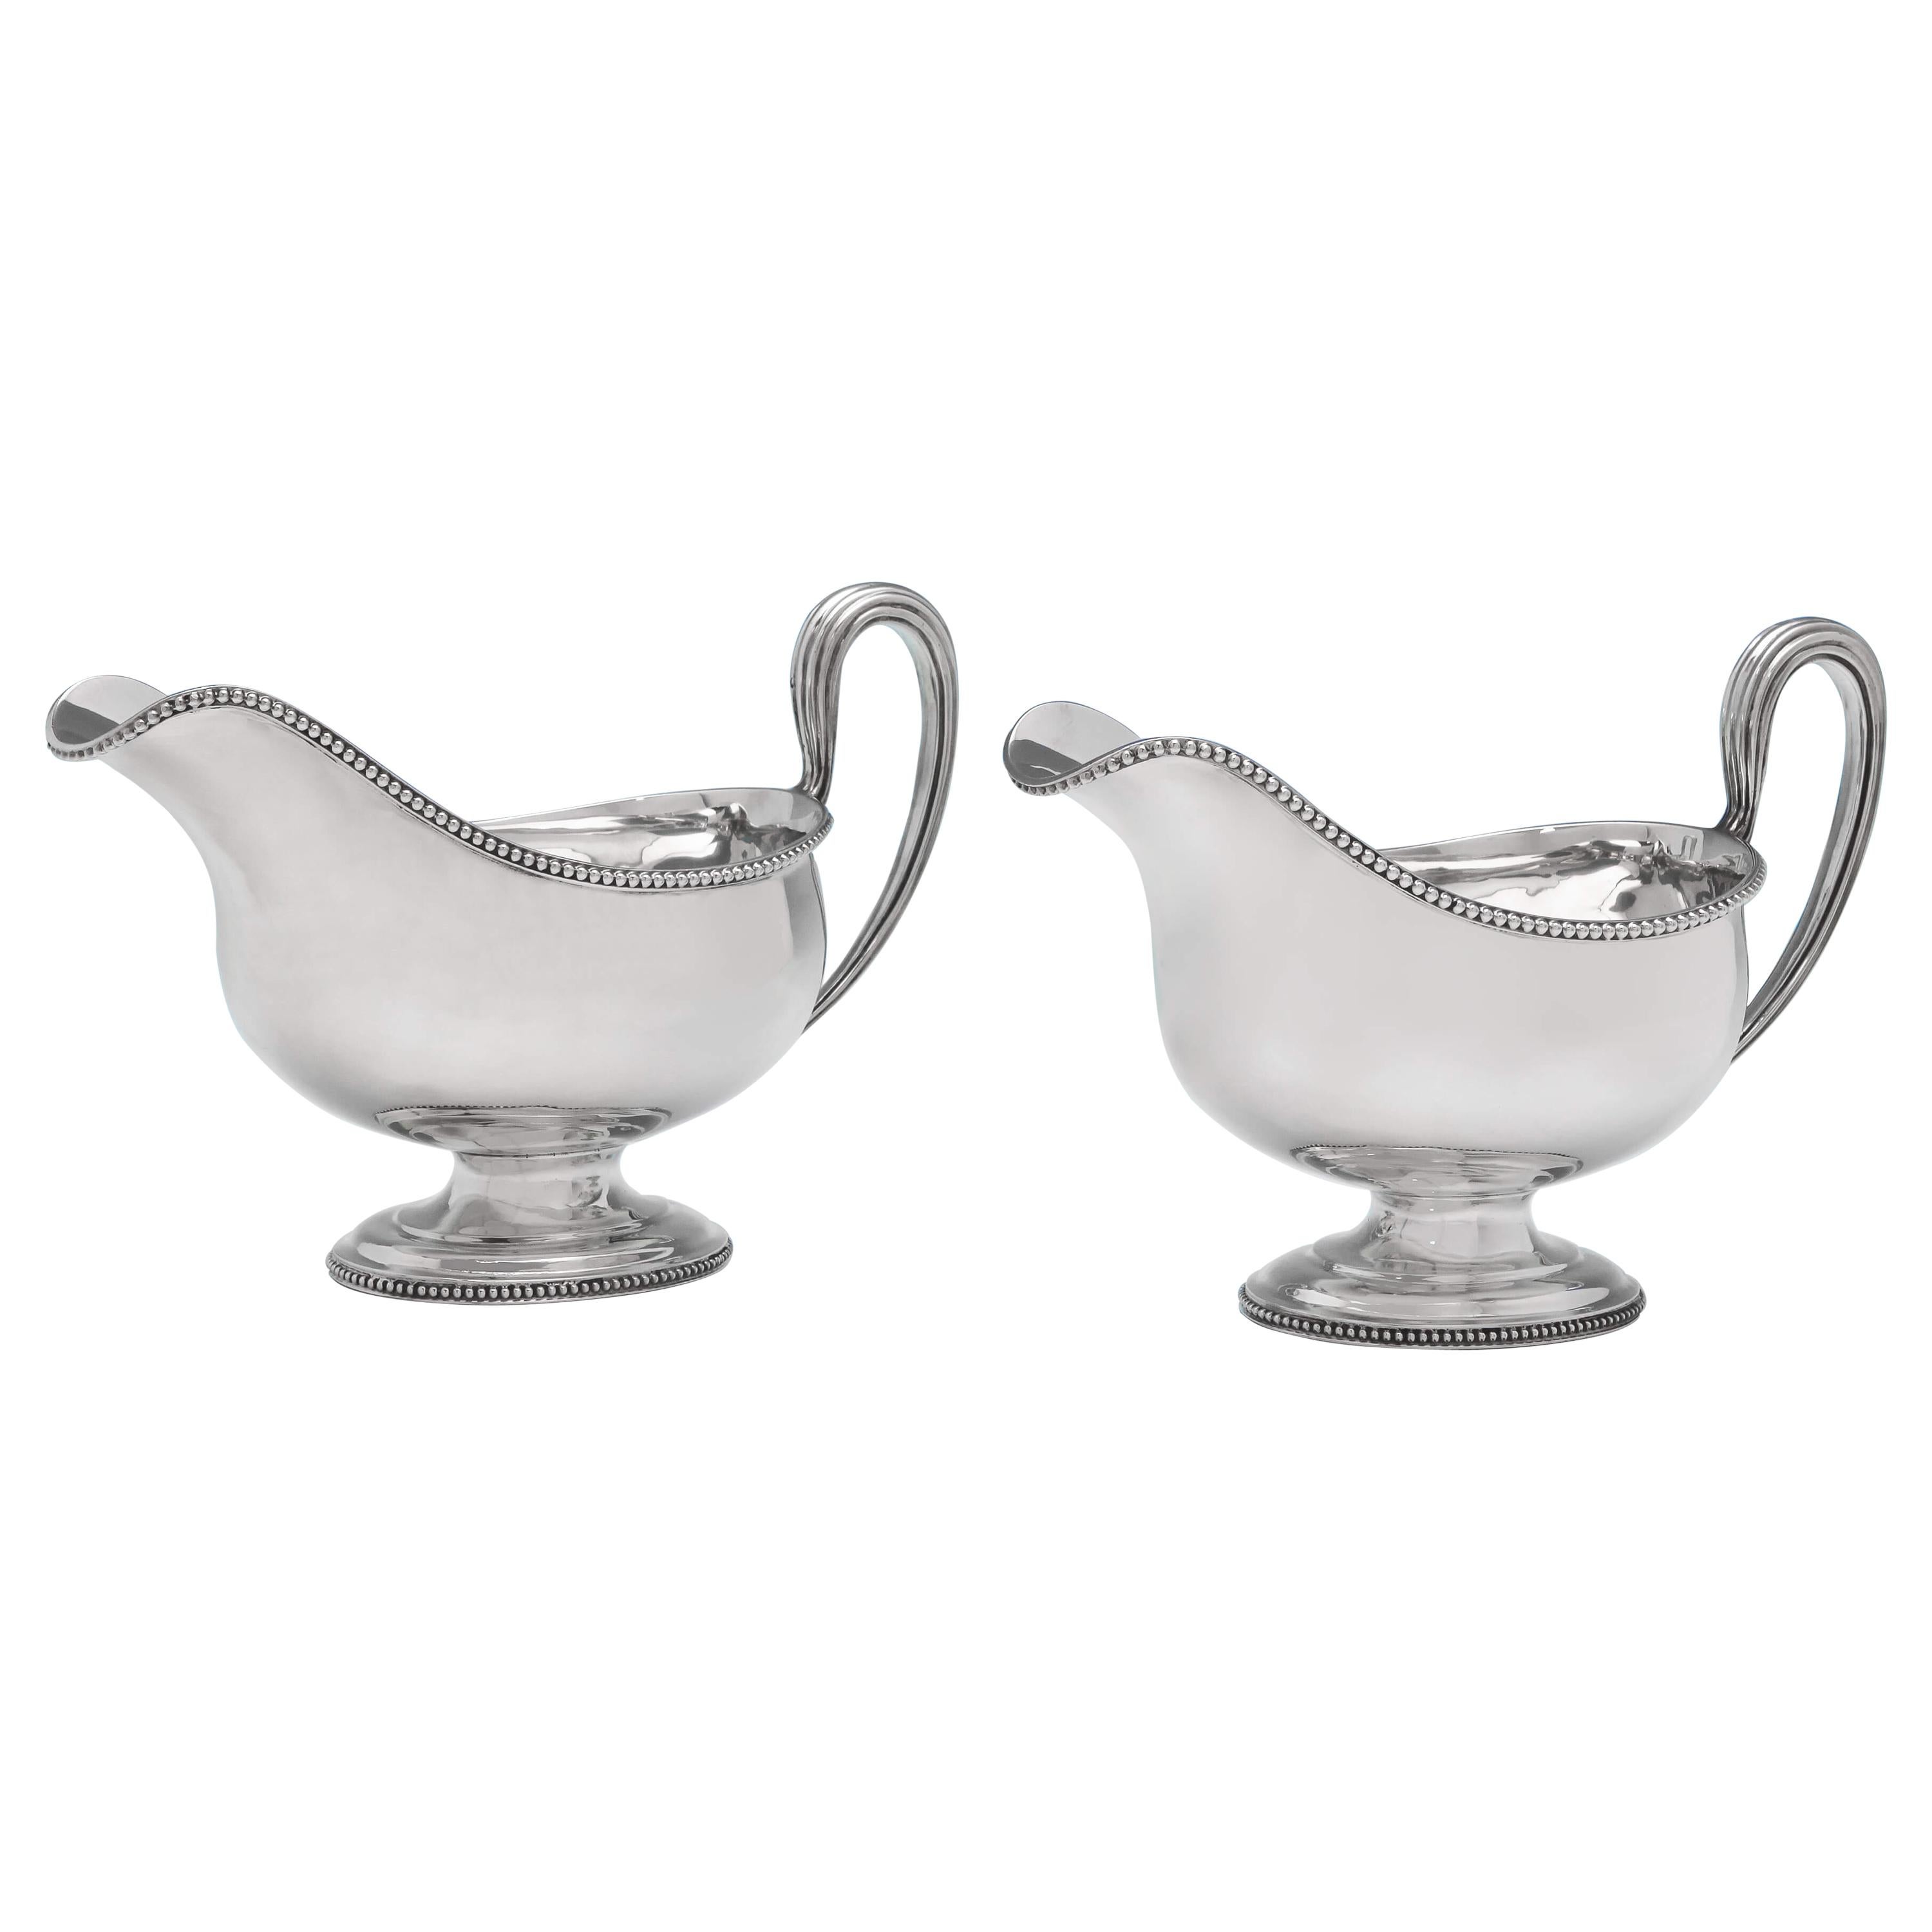 Oversized pair of Edwardian Antique Sterling Silver Sauce Boats - 36 troy ounces For Sale